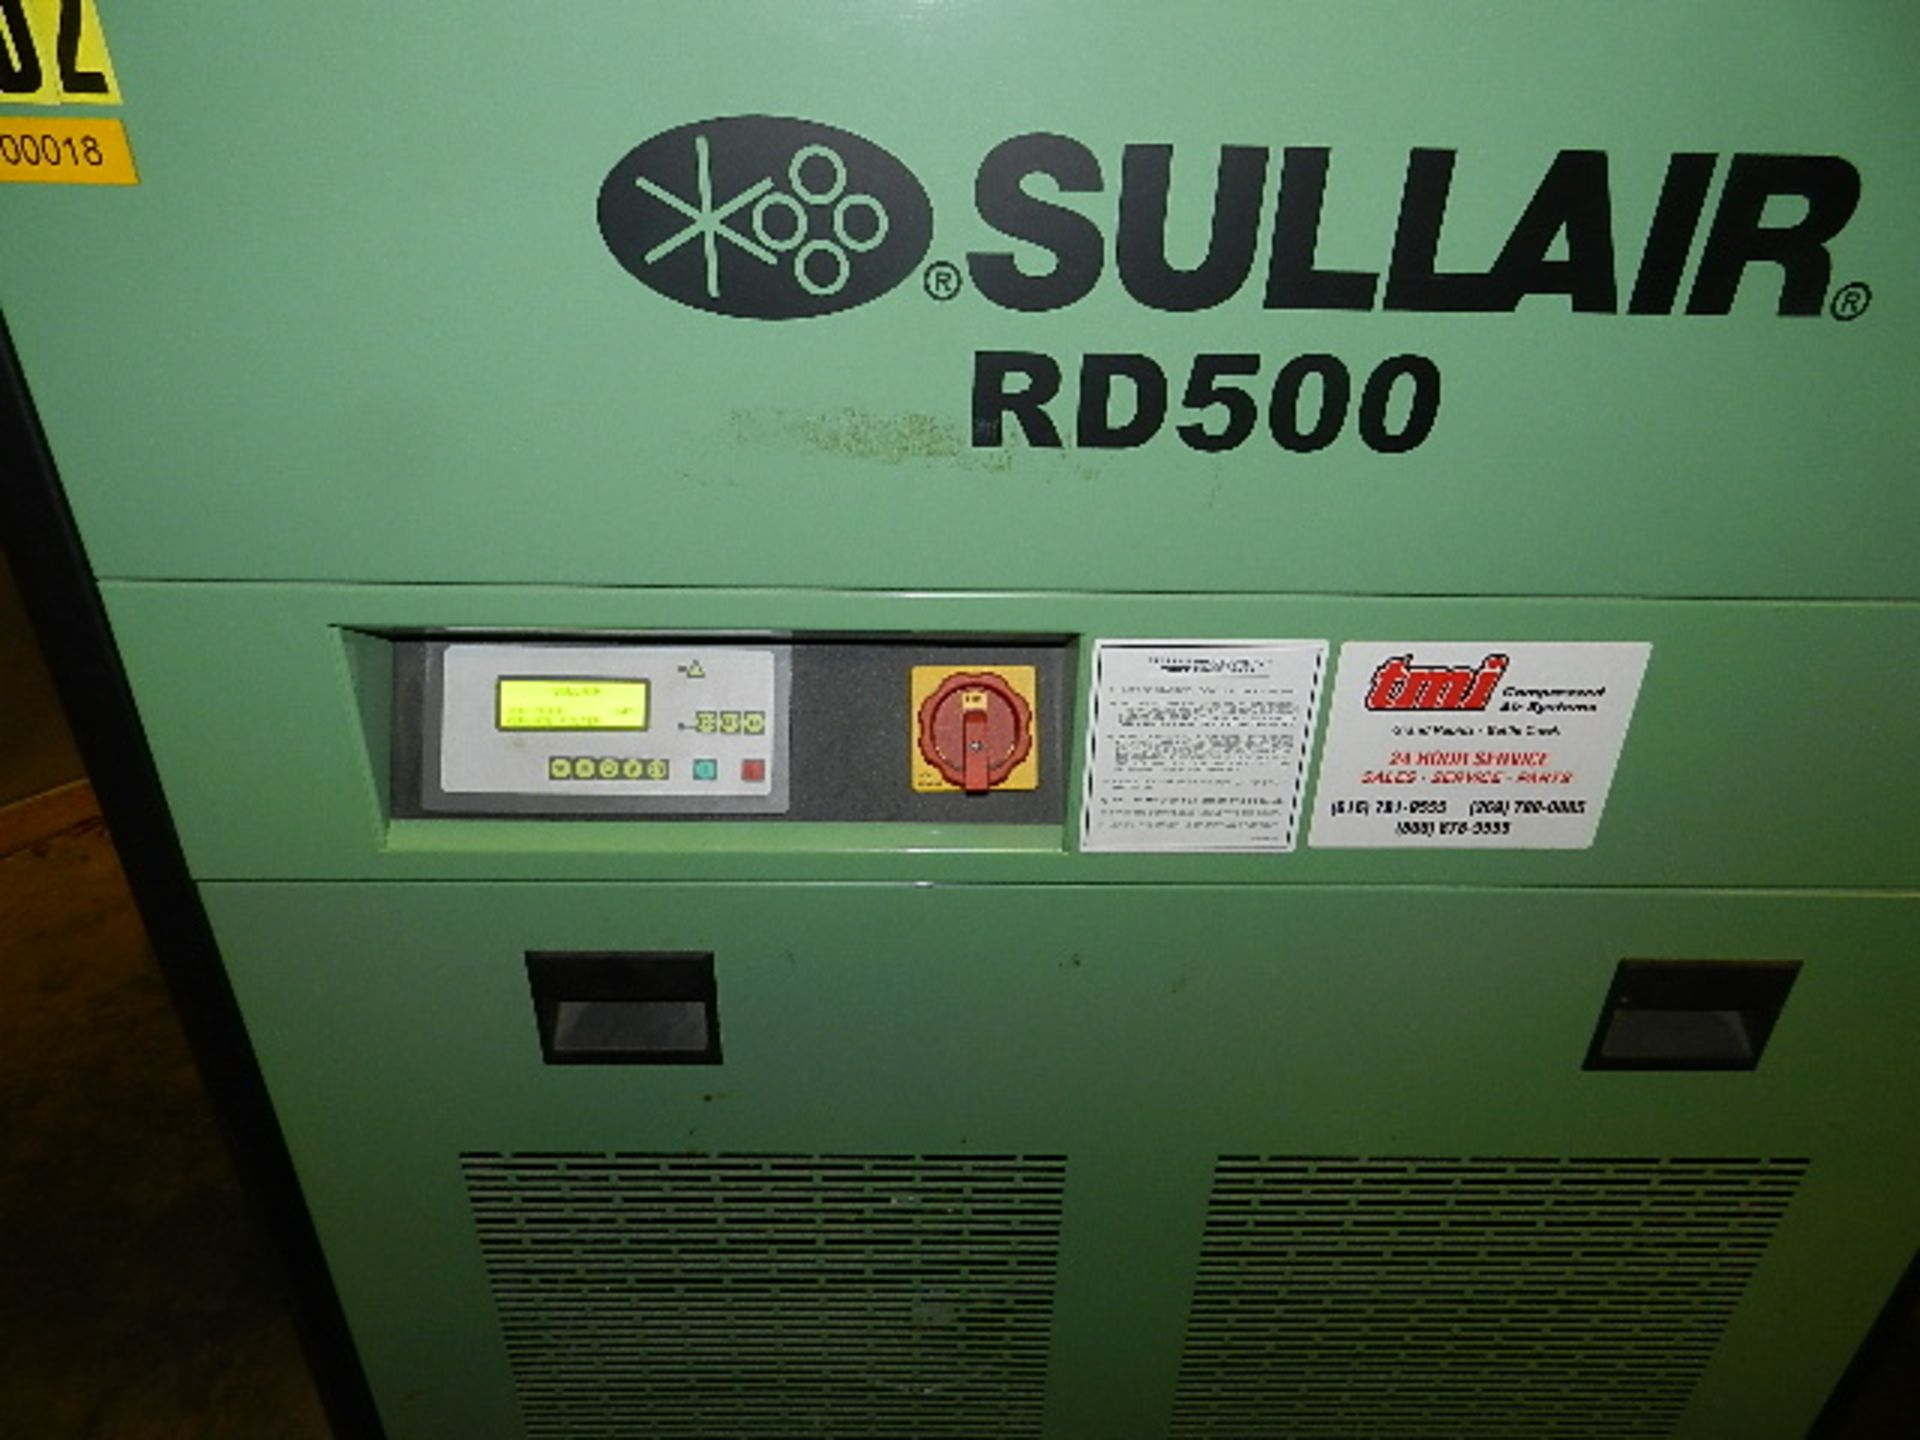 Sullair air dryer, model RD-500-460-3-60-A, 460 volt, 3 phase, 230 psi, includes tank, 17,114 - Image 3 of 5